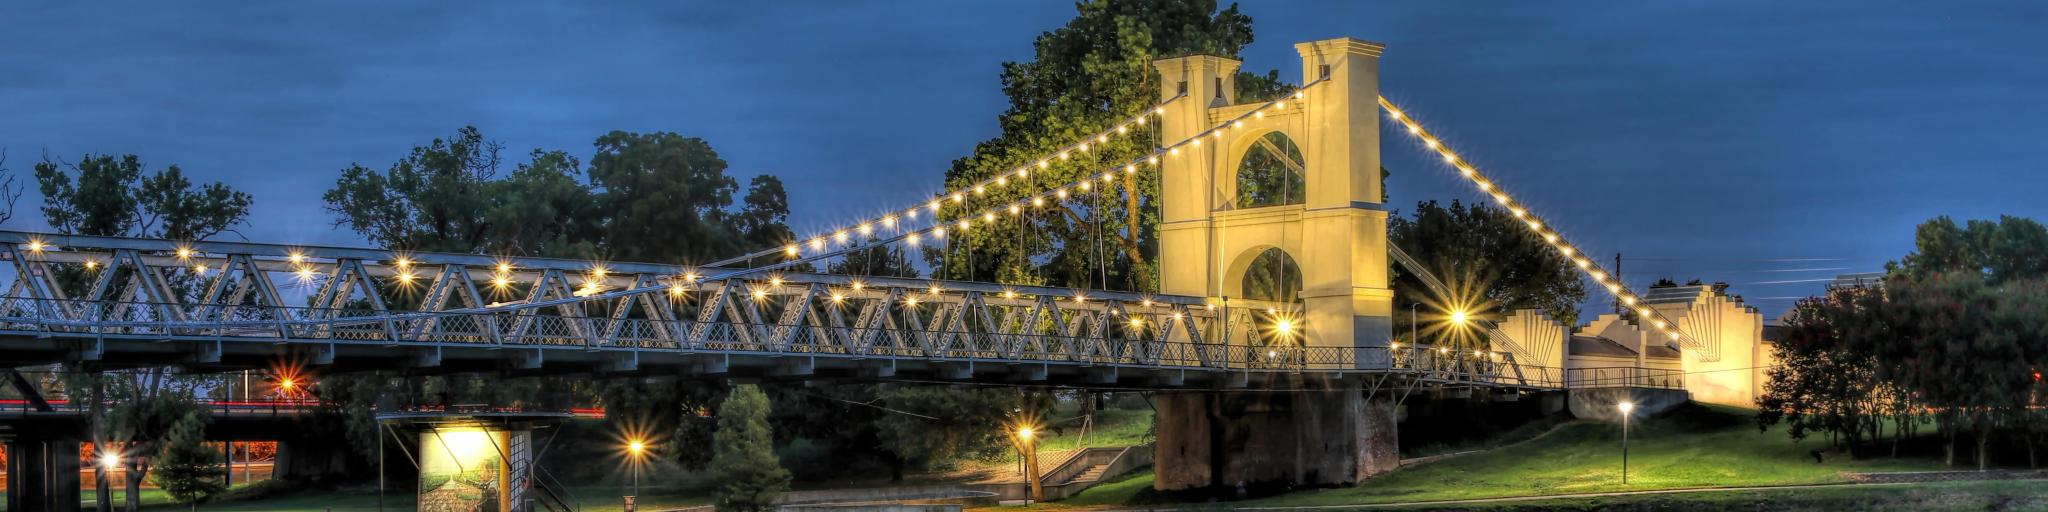 The historic Waco suspension bridge, built in 1870 and located in Indian spring park on the Brazos River.